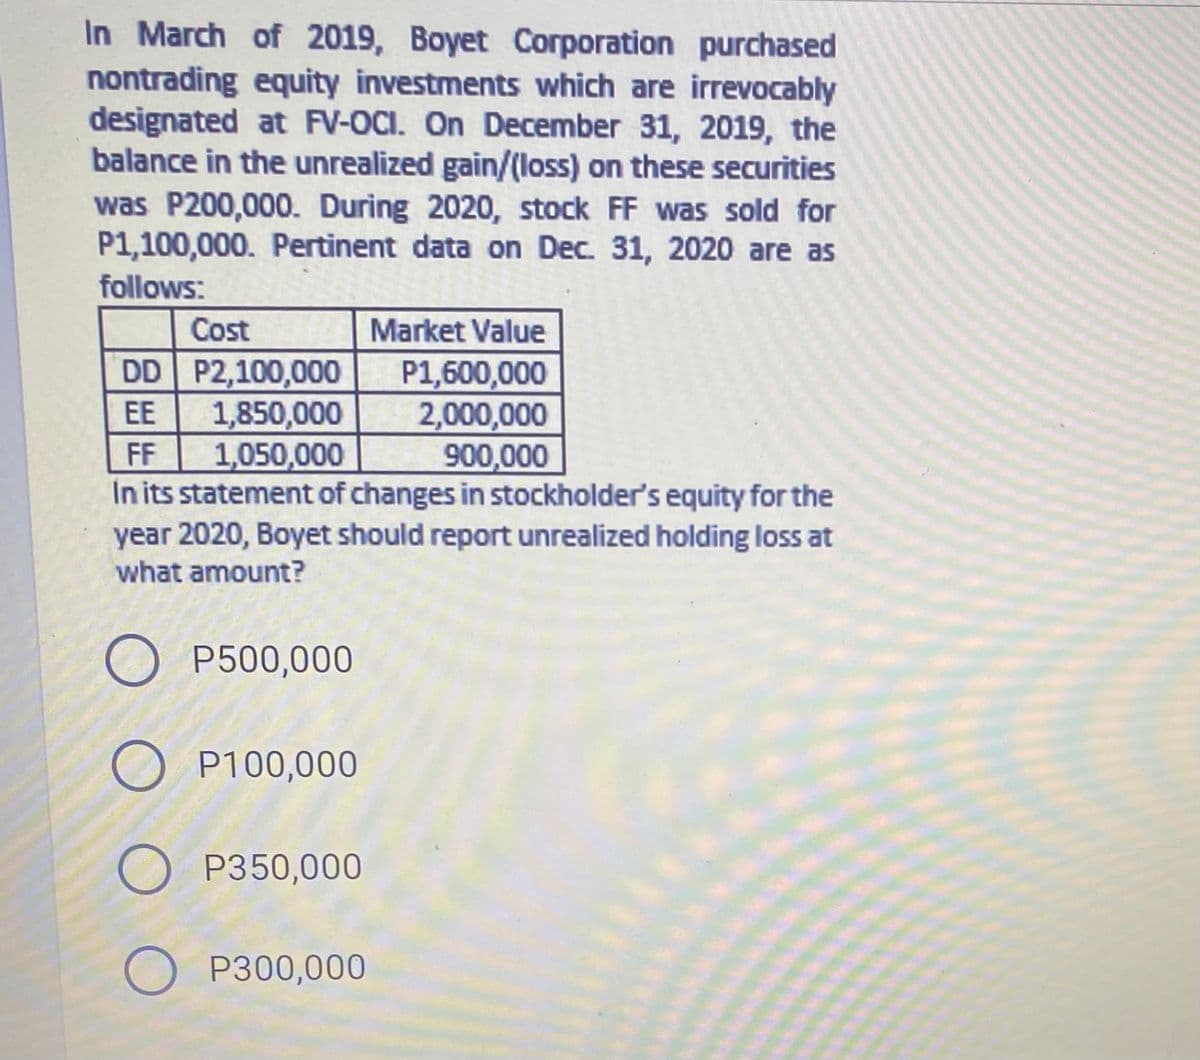 In March of 2019, Boyet Corporation purchased
nontrading equity investments which are irrevocably
designated at FV-OCI. On December 31, 2019, the
balance in the unrealized gain/(loss) on these securities
was P200,000. During 2020, stock FF was sold for
P1,100,000. Pertinent data on Dec. 31, 2020 are as
follows:
Cost
Market Value
DD P2,100,000
1,850,000
FF
P1,600,000
2,000,000
900,000
EE
1,050,000
In its statement of changes in stockholder's equity for the
year 2020, Boyet should report unrealized holding loss at
what amount?
O P500,000
O P100,000
O P350,000
O P300,000
